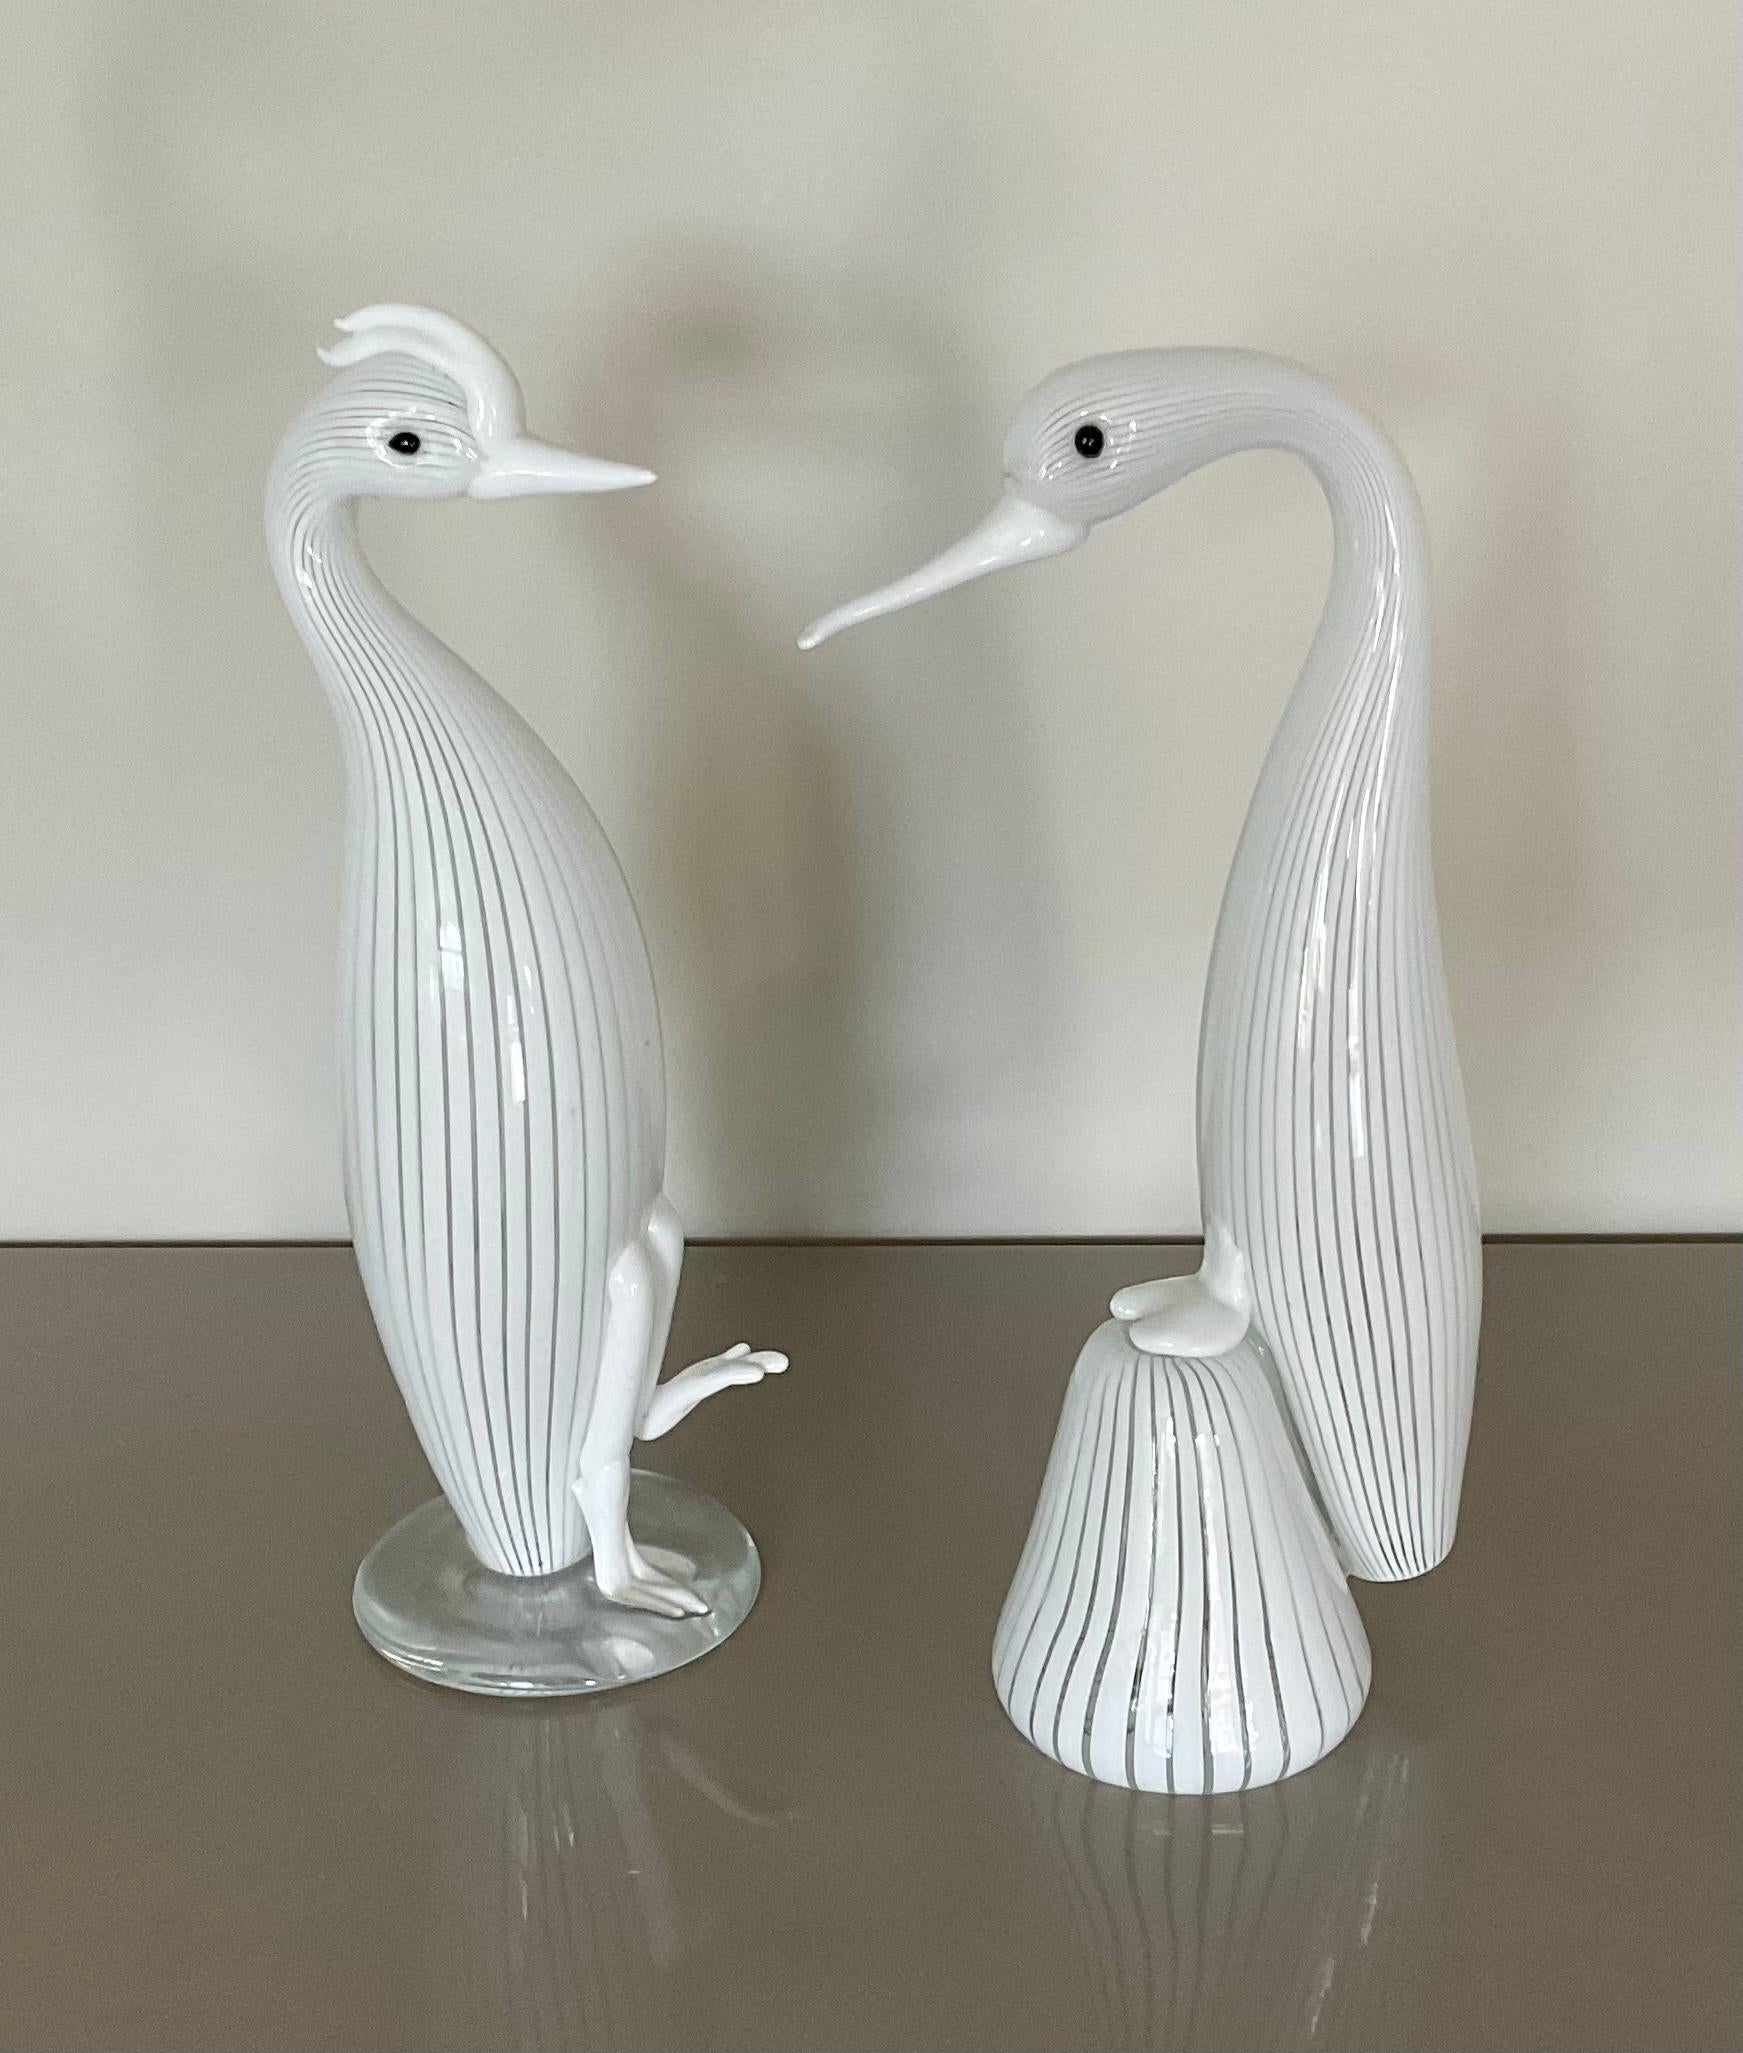 Rare pair of Venini water birds designed by Fulvio Bianconi for Venini circa 1950s. These birds are increasingly harder to find. Both retain their original 3 line acid stamp. 1 retains its original label. Group photo shown is from the Fulvio